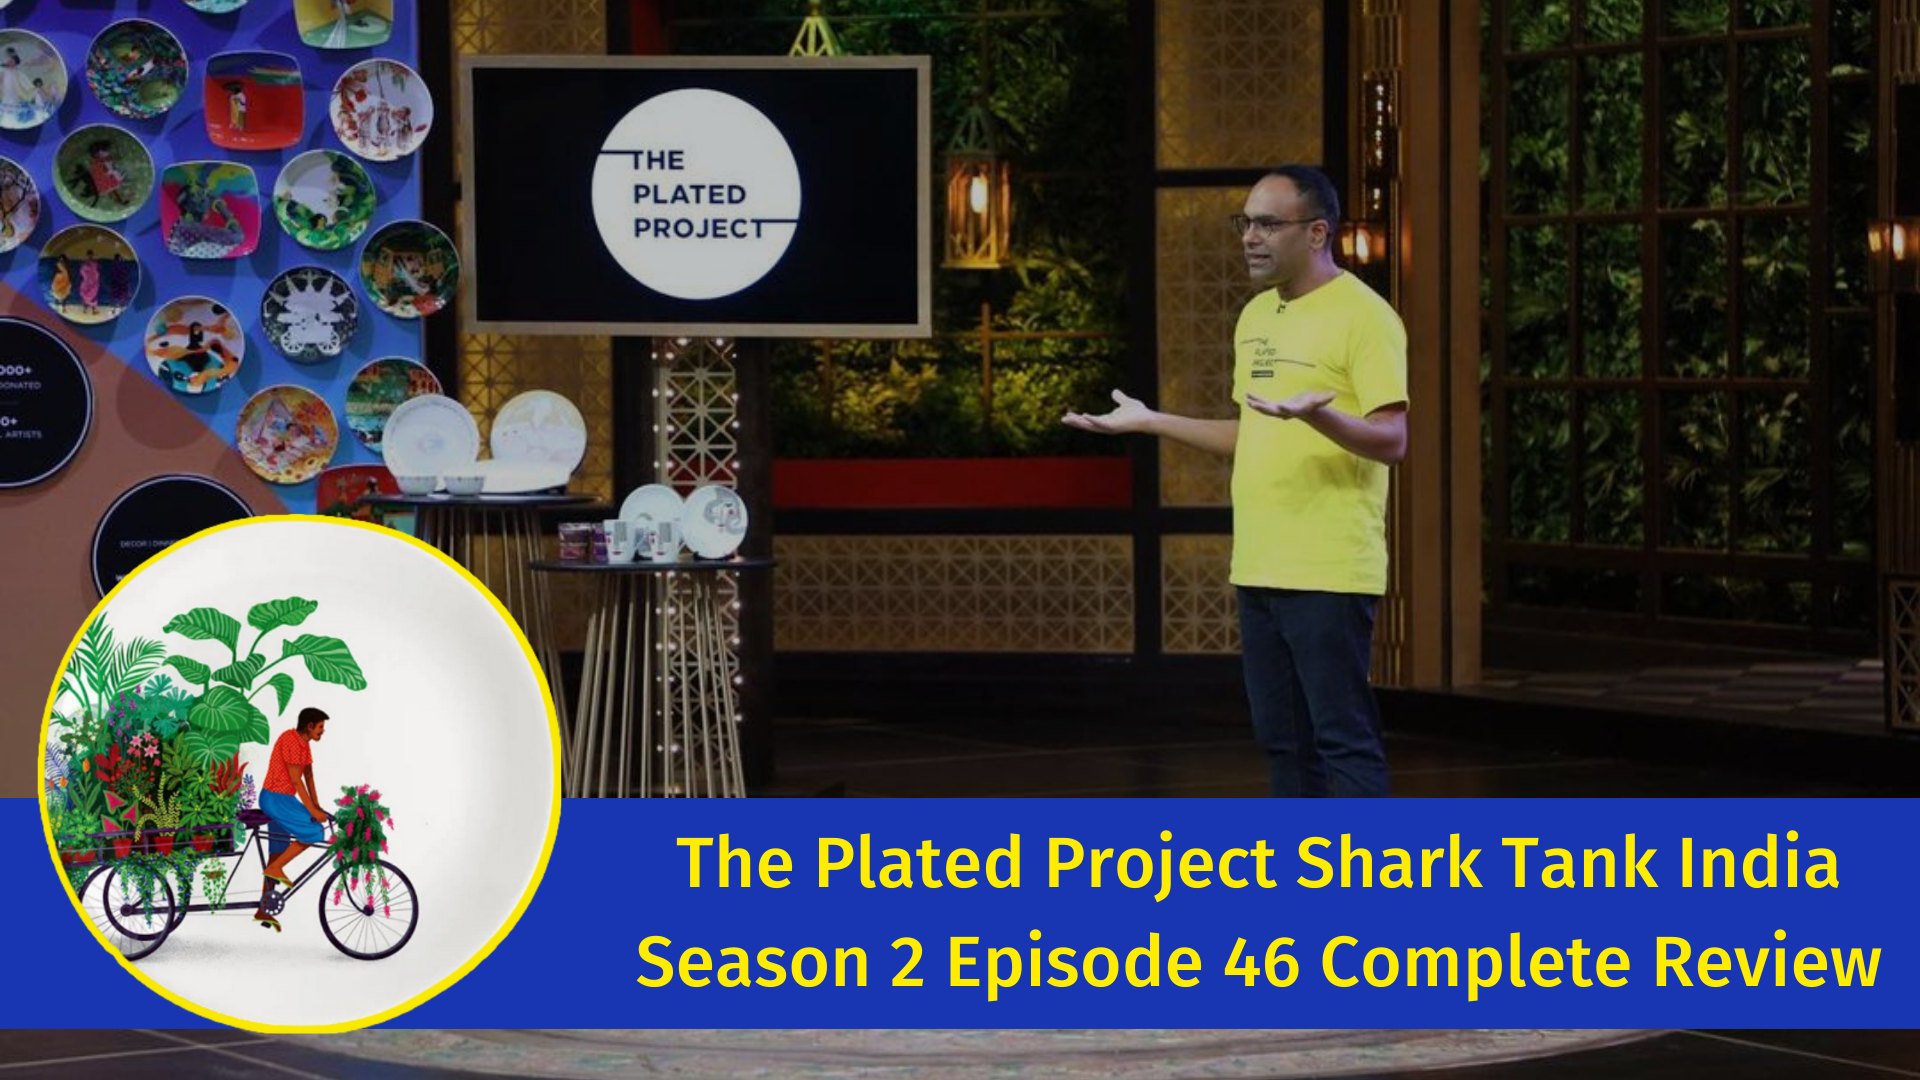 The Plated Project Shark Tank India Season 2 Episode 46 Complete Review